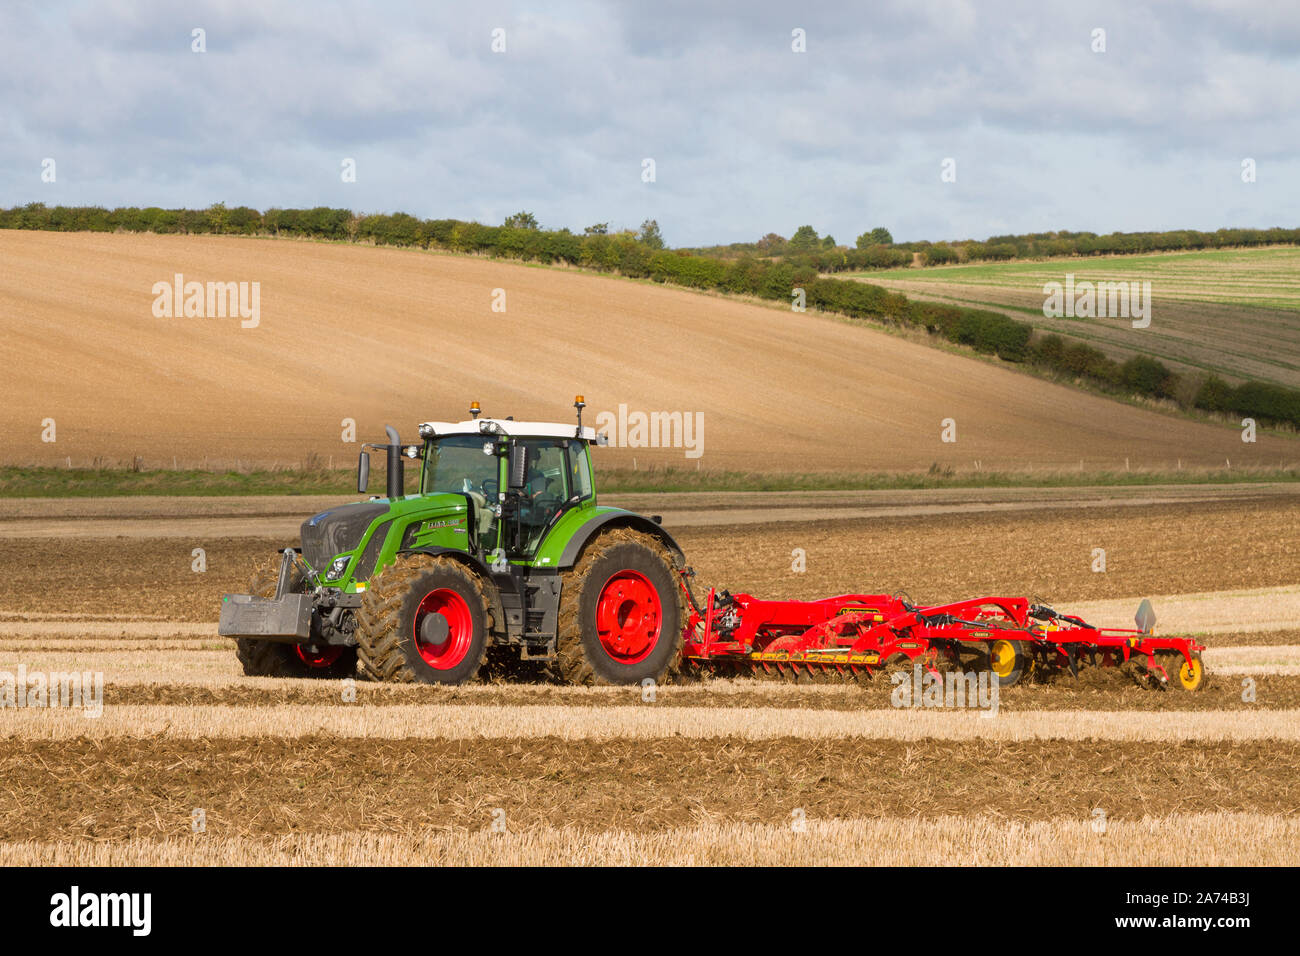 A large modern green Fendt tractor cultivating fields at a ploughing match near Ipsden on the edge of the Chilterns with blue sky and Cumulus clouds Stock Photo